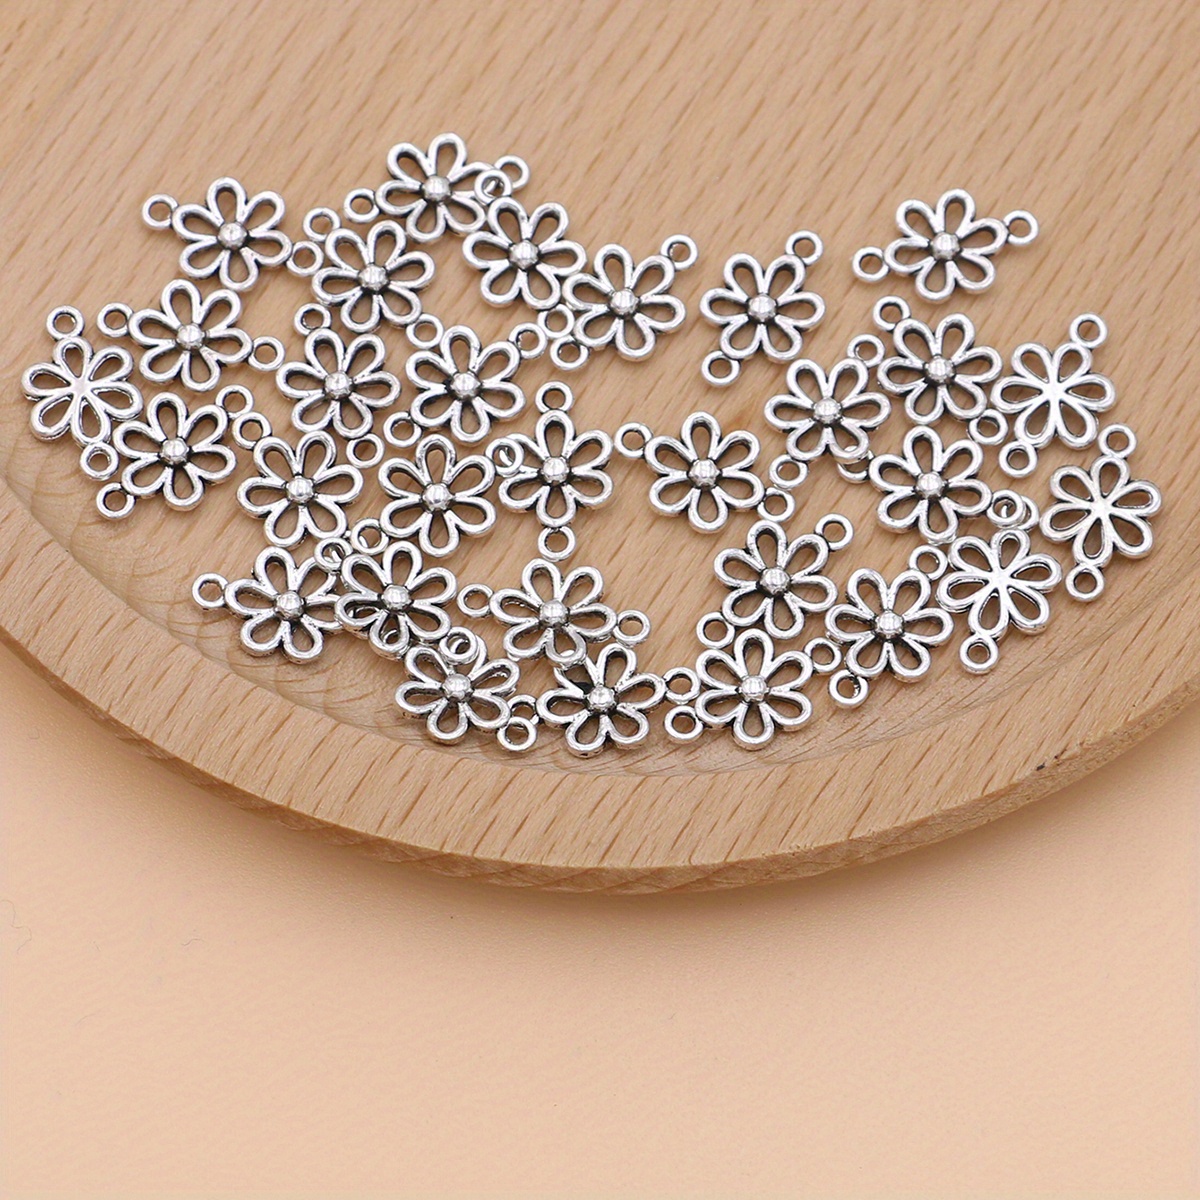 10pcs/pack Antique Silver Plated Flower Charms Pendants for Jewelry Making Bracelet DIY Accessories Craft,Temu